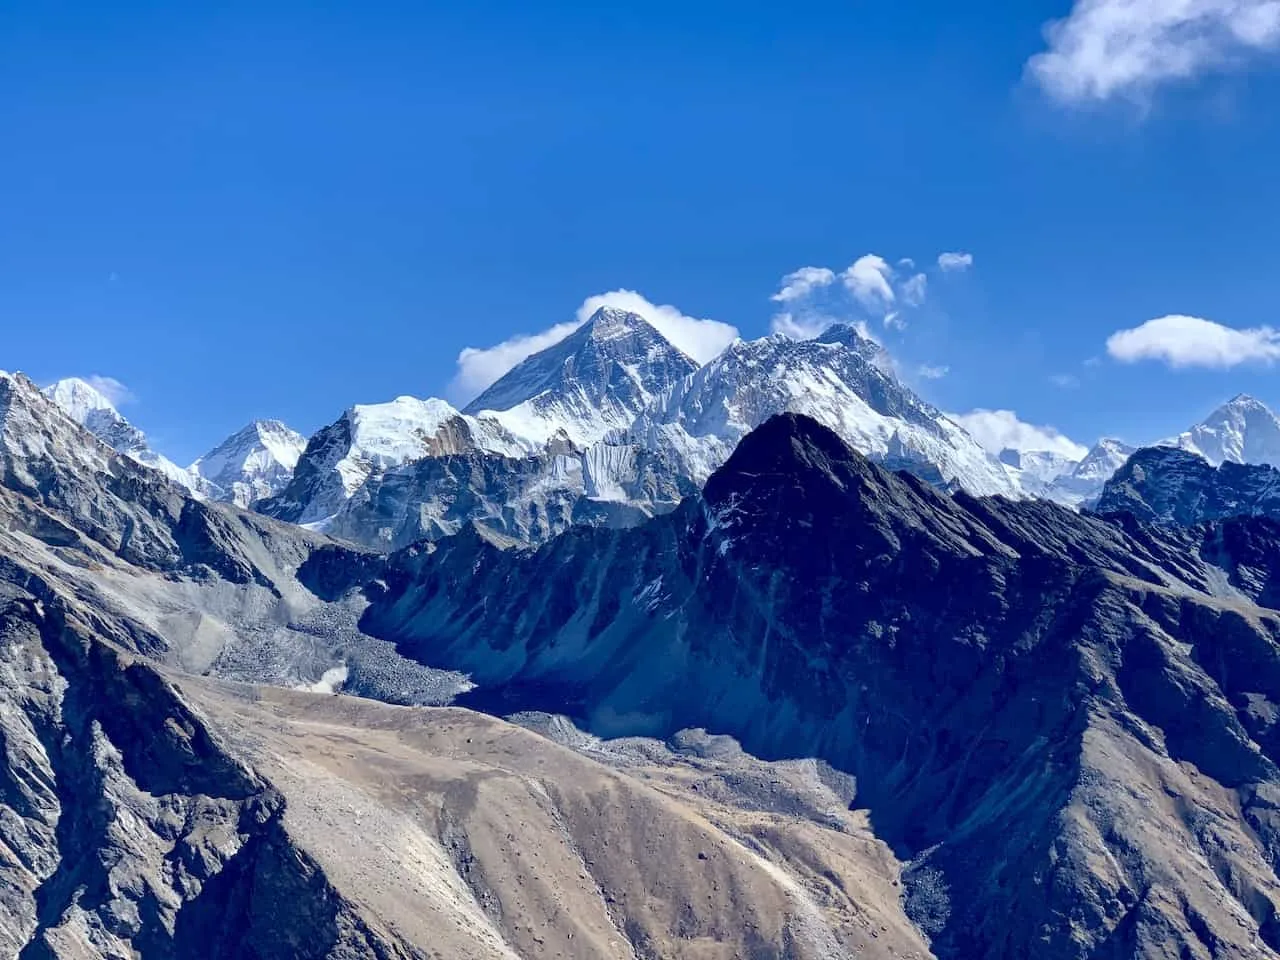 Mount Everest Viewpoint from Gokyo Ri